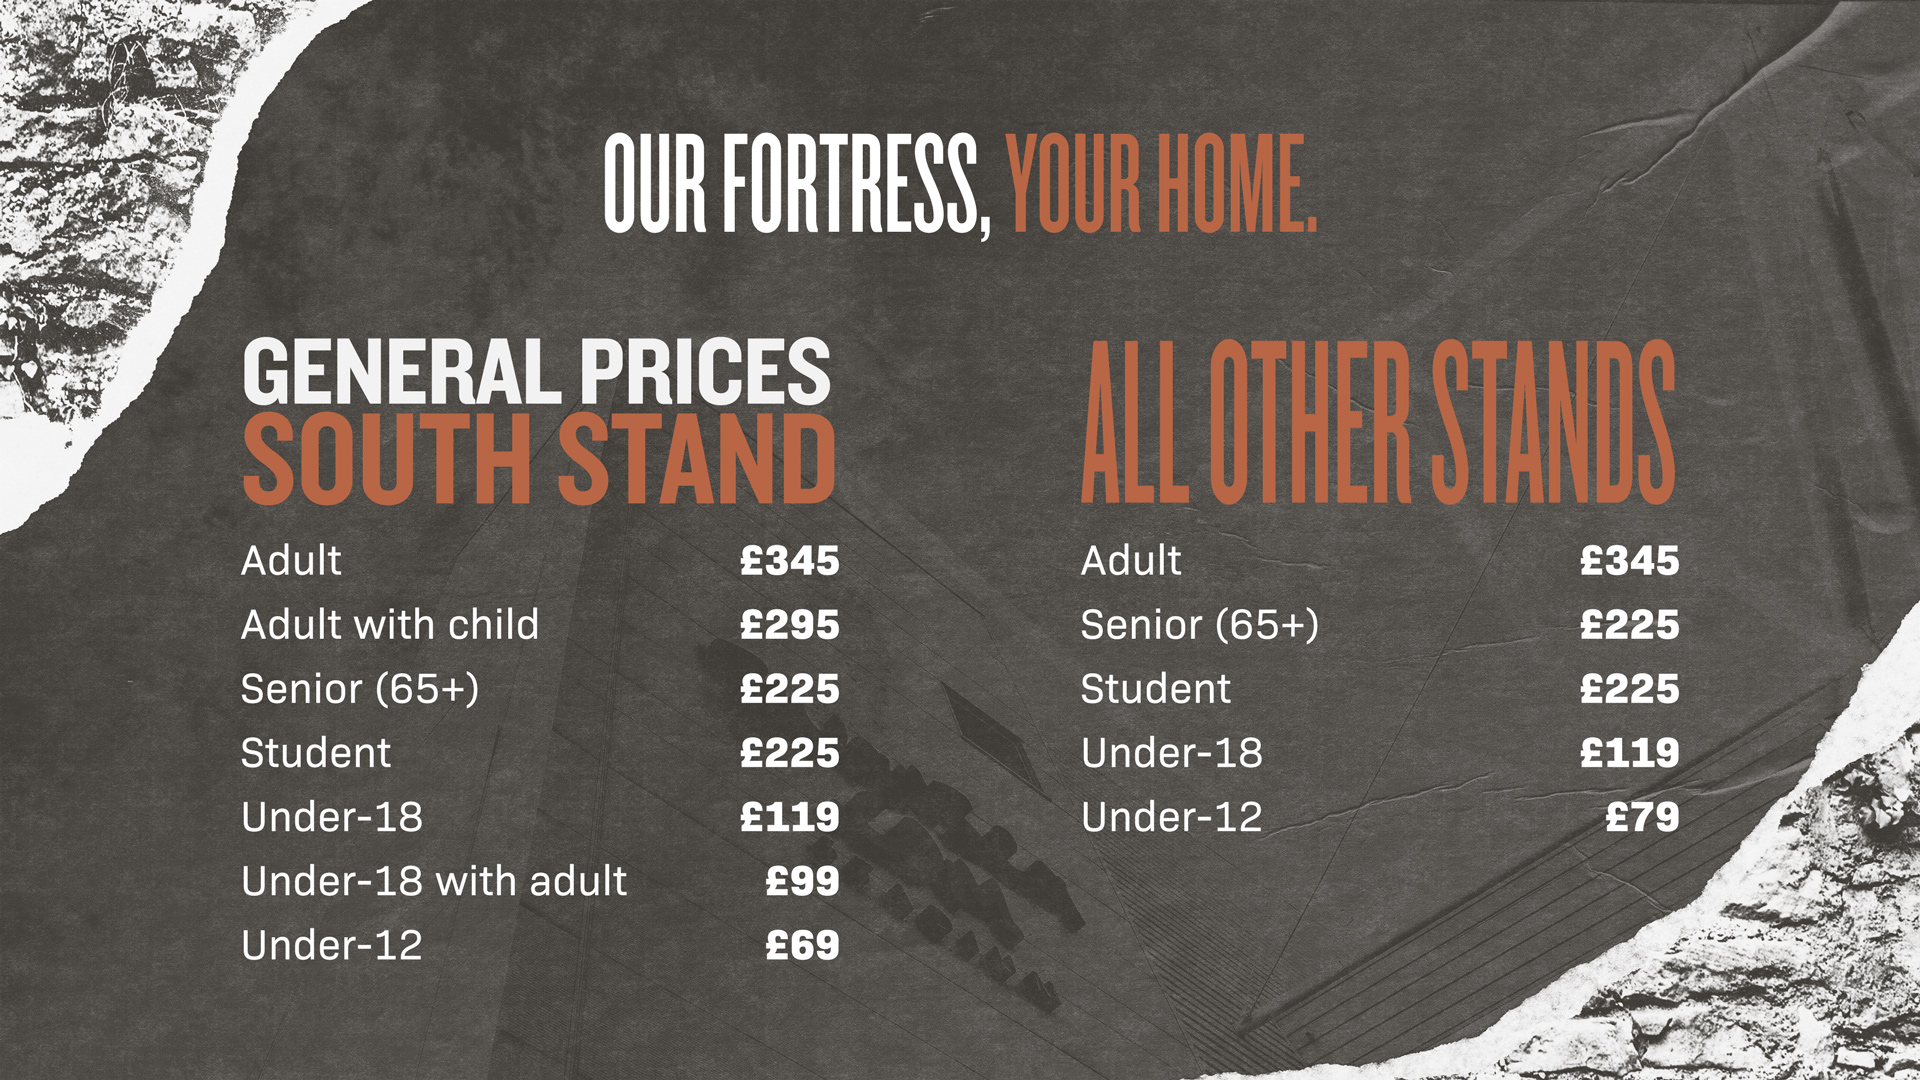 A graphic showing the 2022-23 season ticket prices. General prices - South Stand: Adult £345, Adult with child £295, Senior £225, Student £225, Under-18 £119, Under-18 with adult £99, Under-12 £69.  Prices in all other stands: Adult £345, Senior £225, Student £335, Under-18 £119, Under-12 £79.